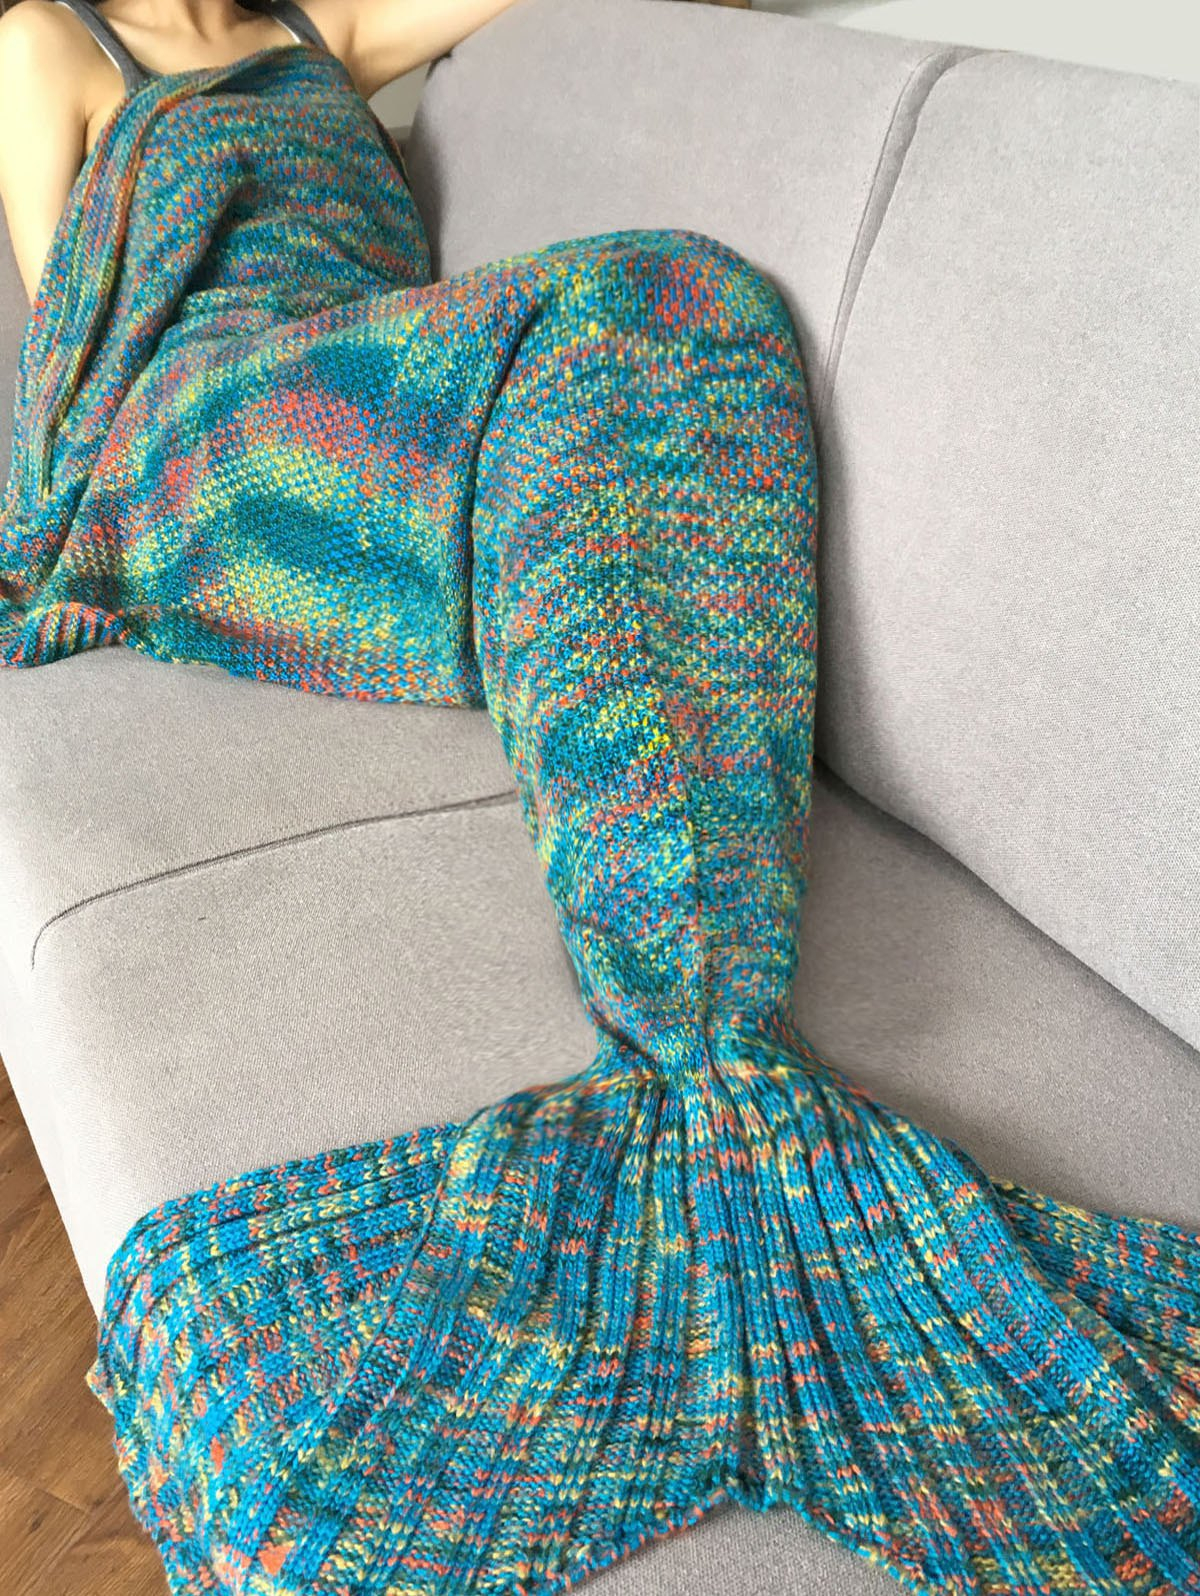 Mermaid Cocoon Knitting Pattern Fashion Crochet Knitted Super Soft Mermaid Tail Shape Blanket For Adult